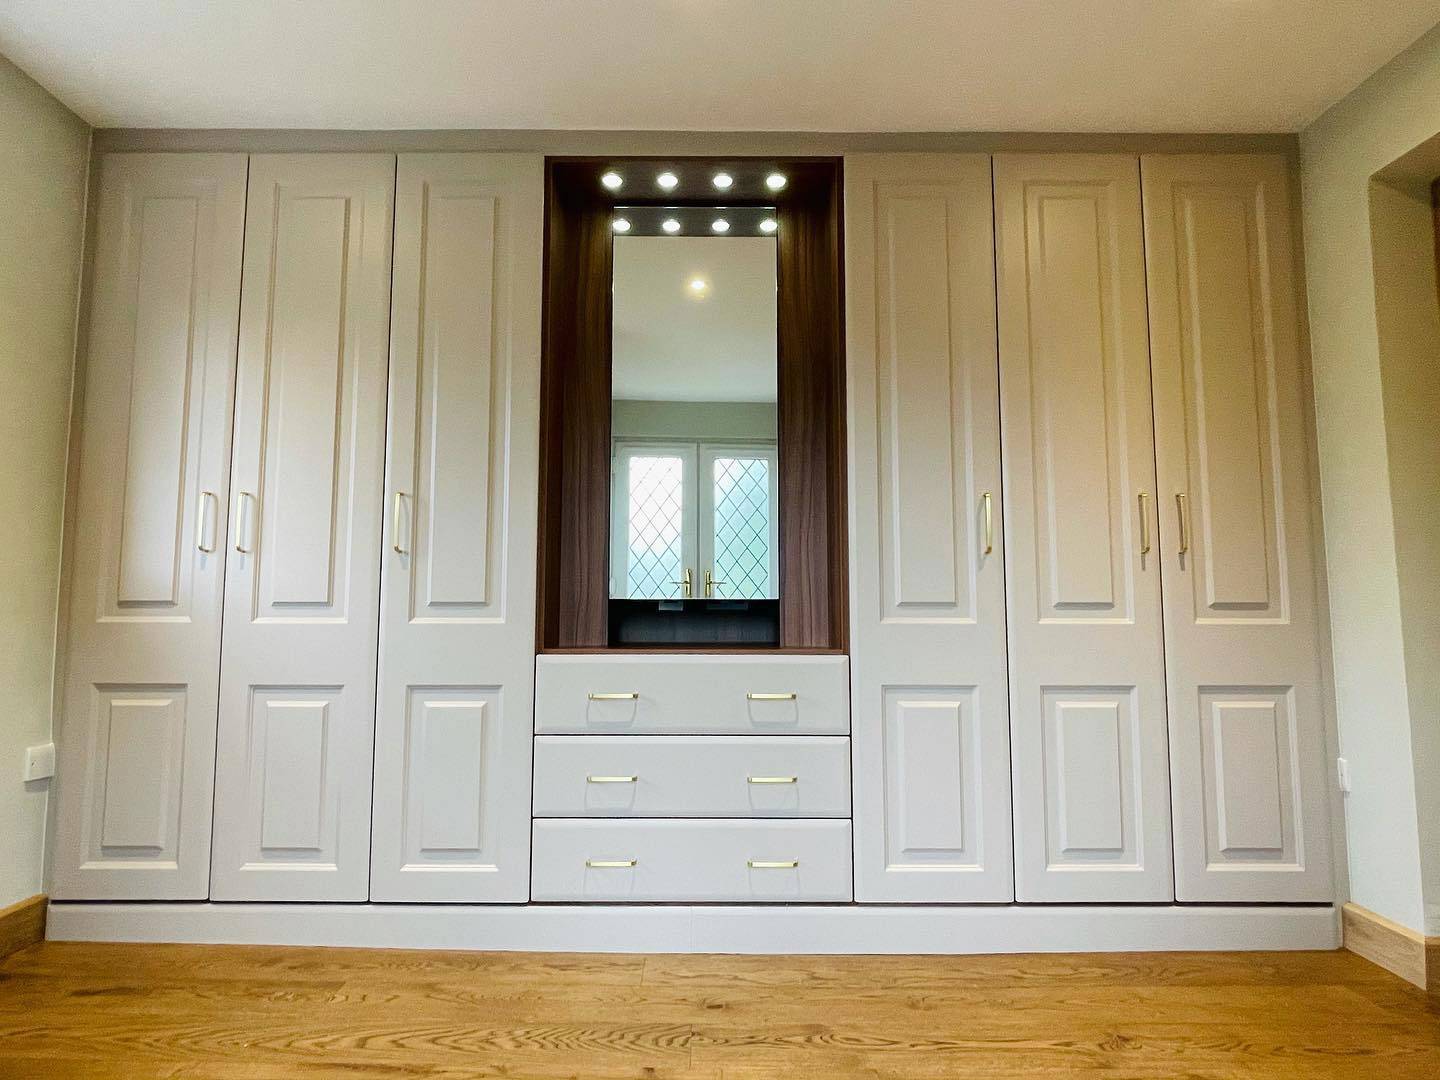 West-Sussex-Fitted-Wardrobes-Bedrooms-Worthing-Bespoke-Bedroom-Bed-Room-Fitted-work4